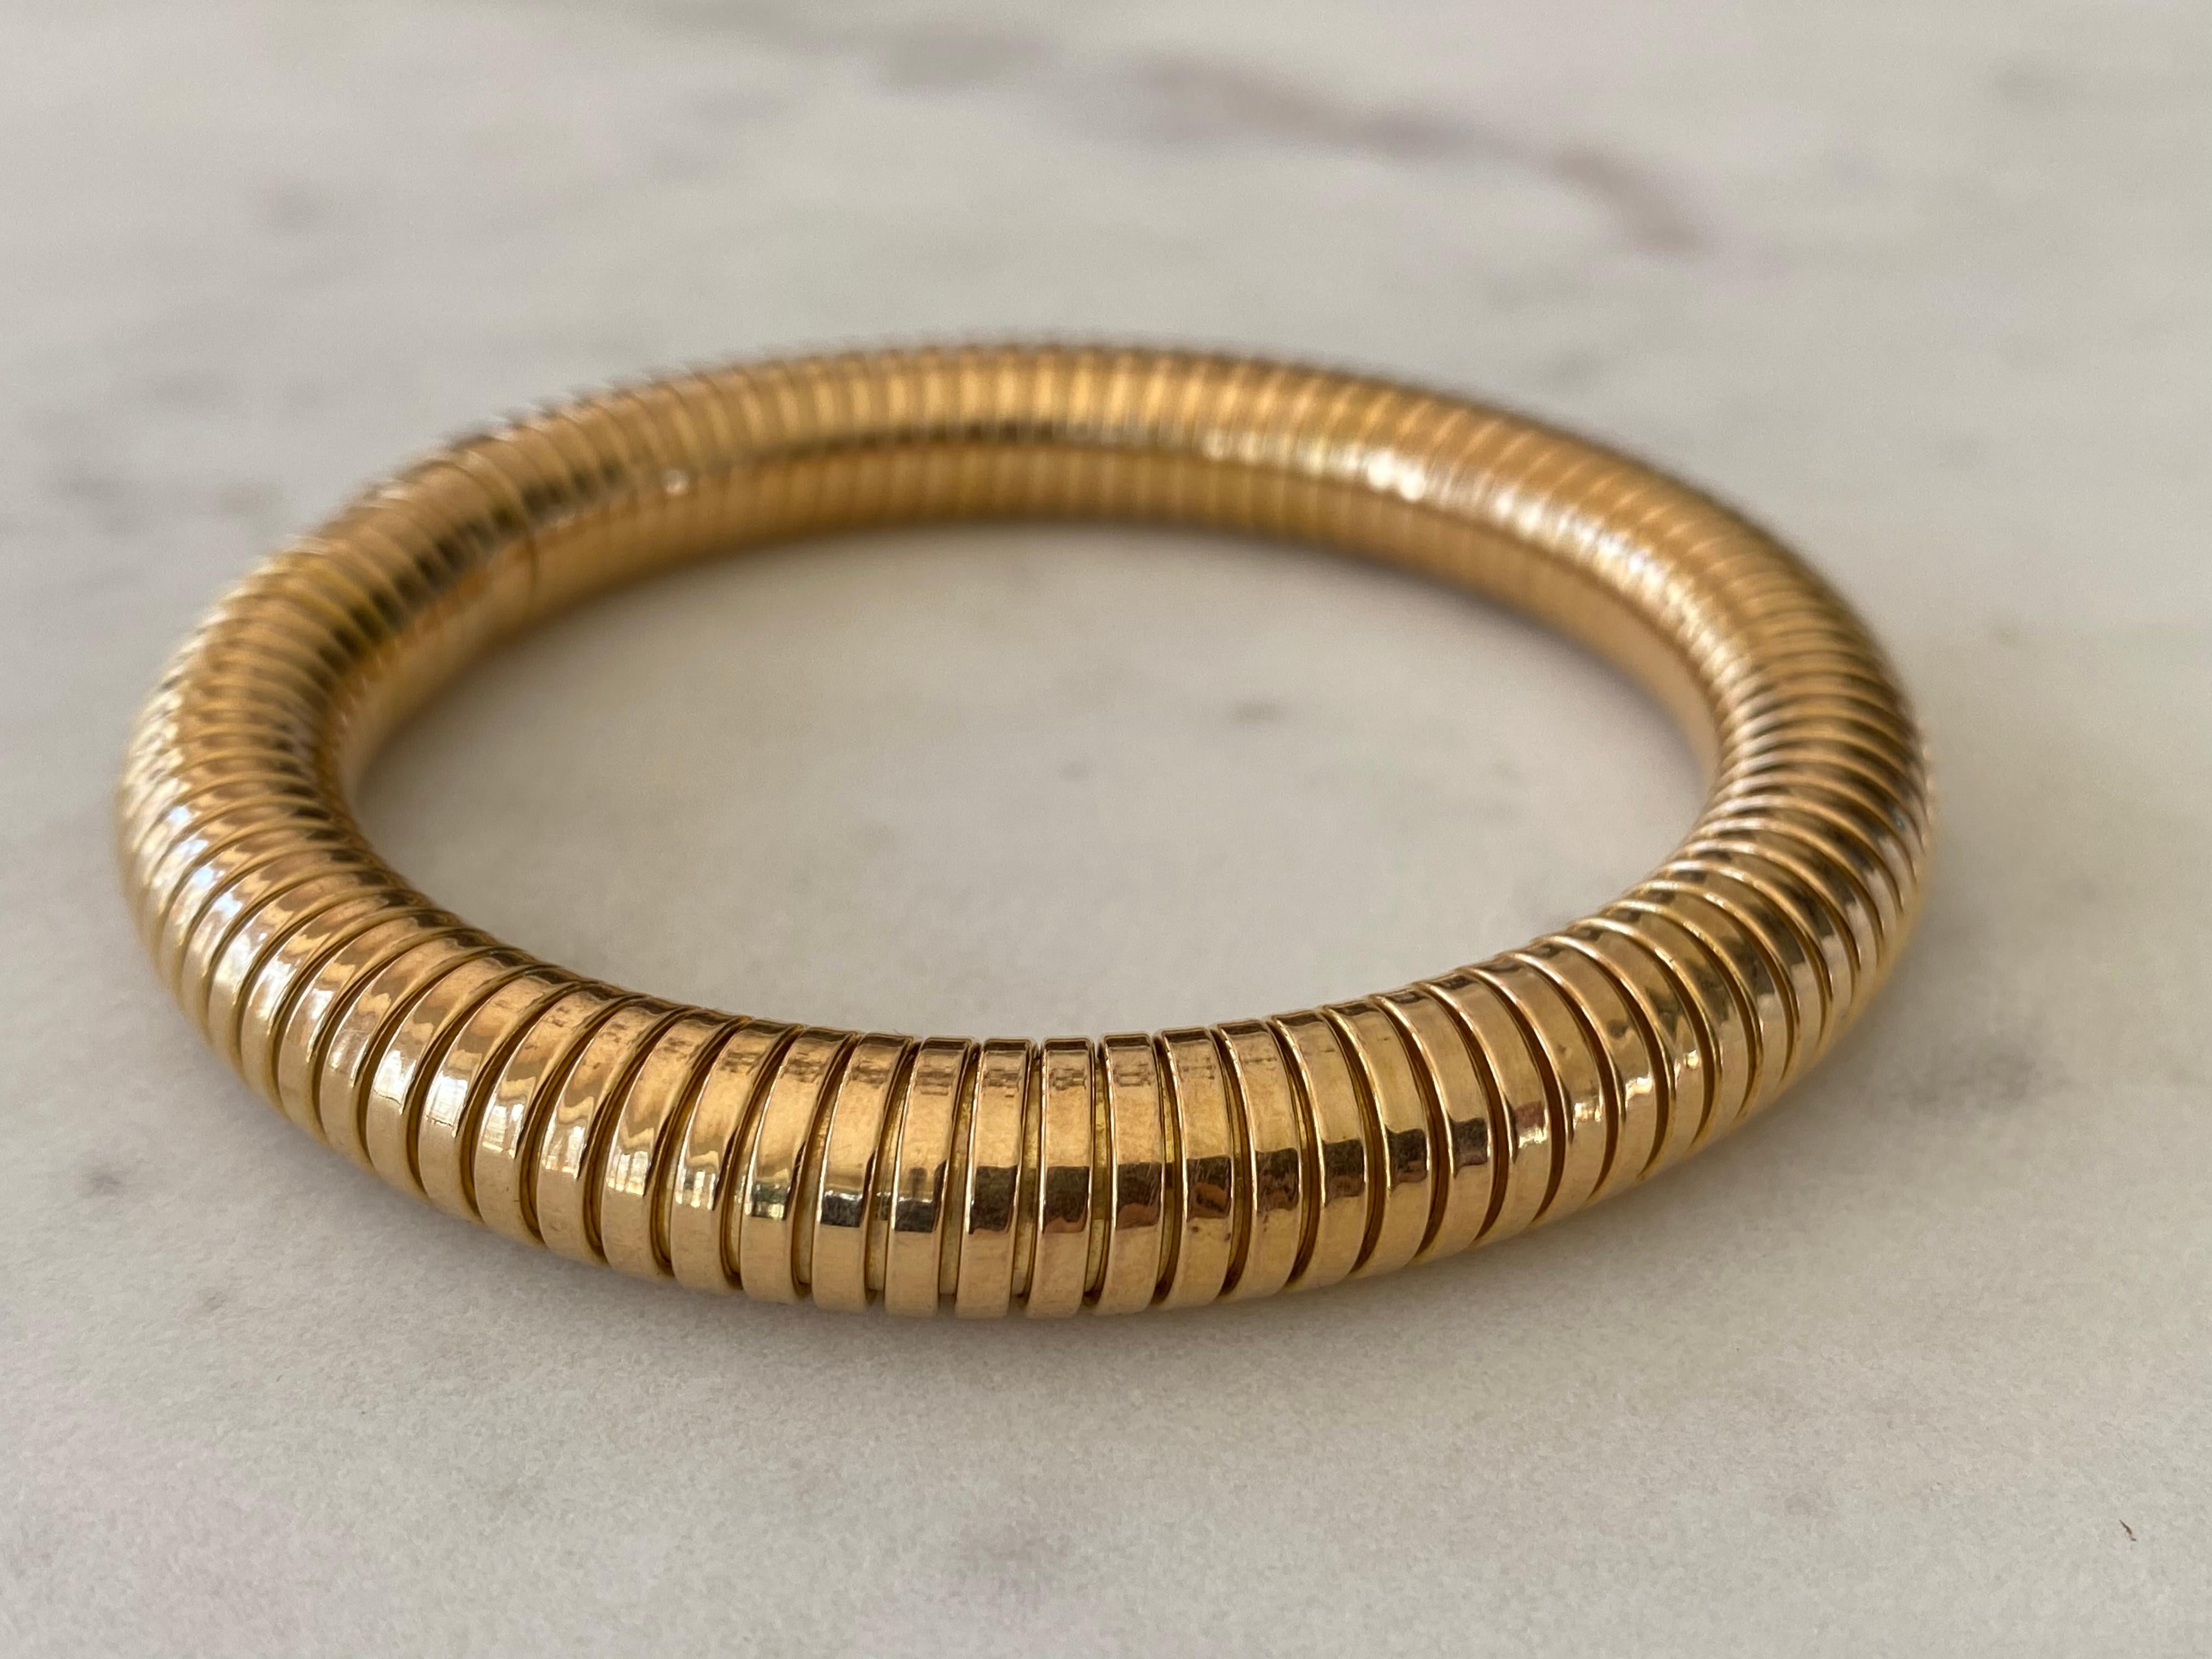 Circa 1940s, this sleek expandable bangle bracelet is fashioned from 18kt rose gold in the classic gas pipe style of the era. The bangle measures 7 inches. 


